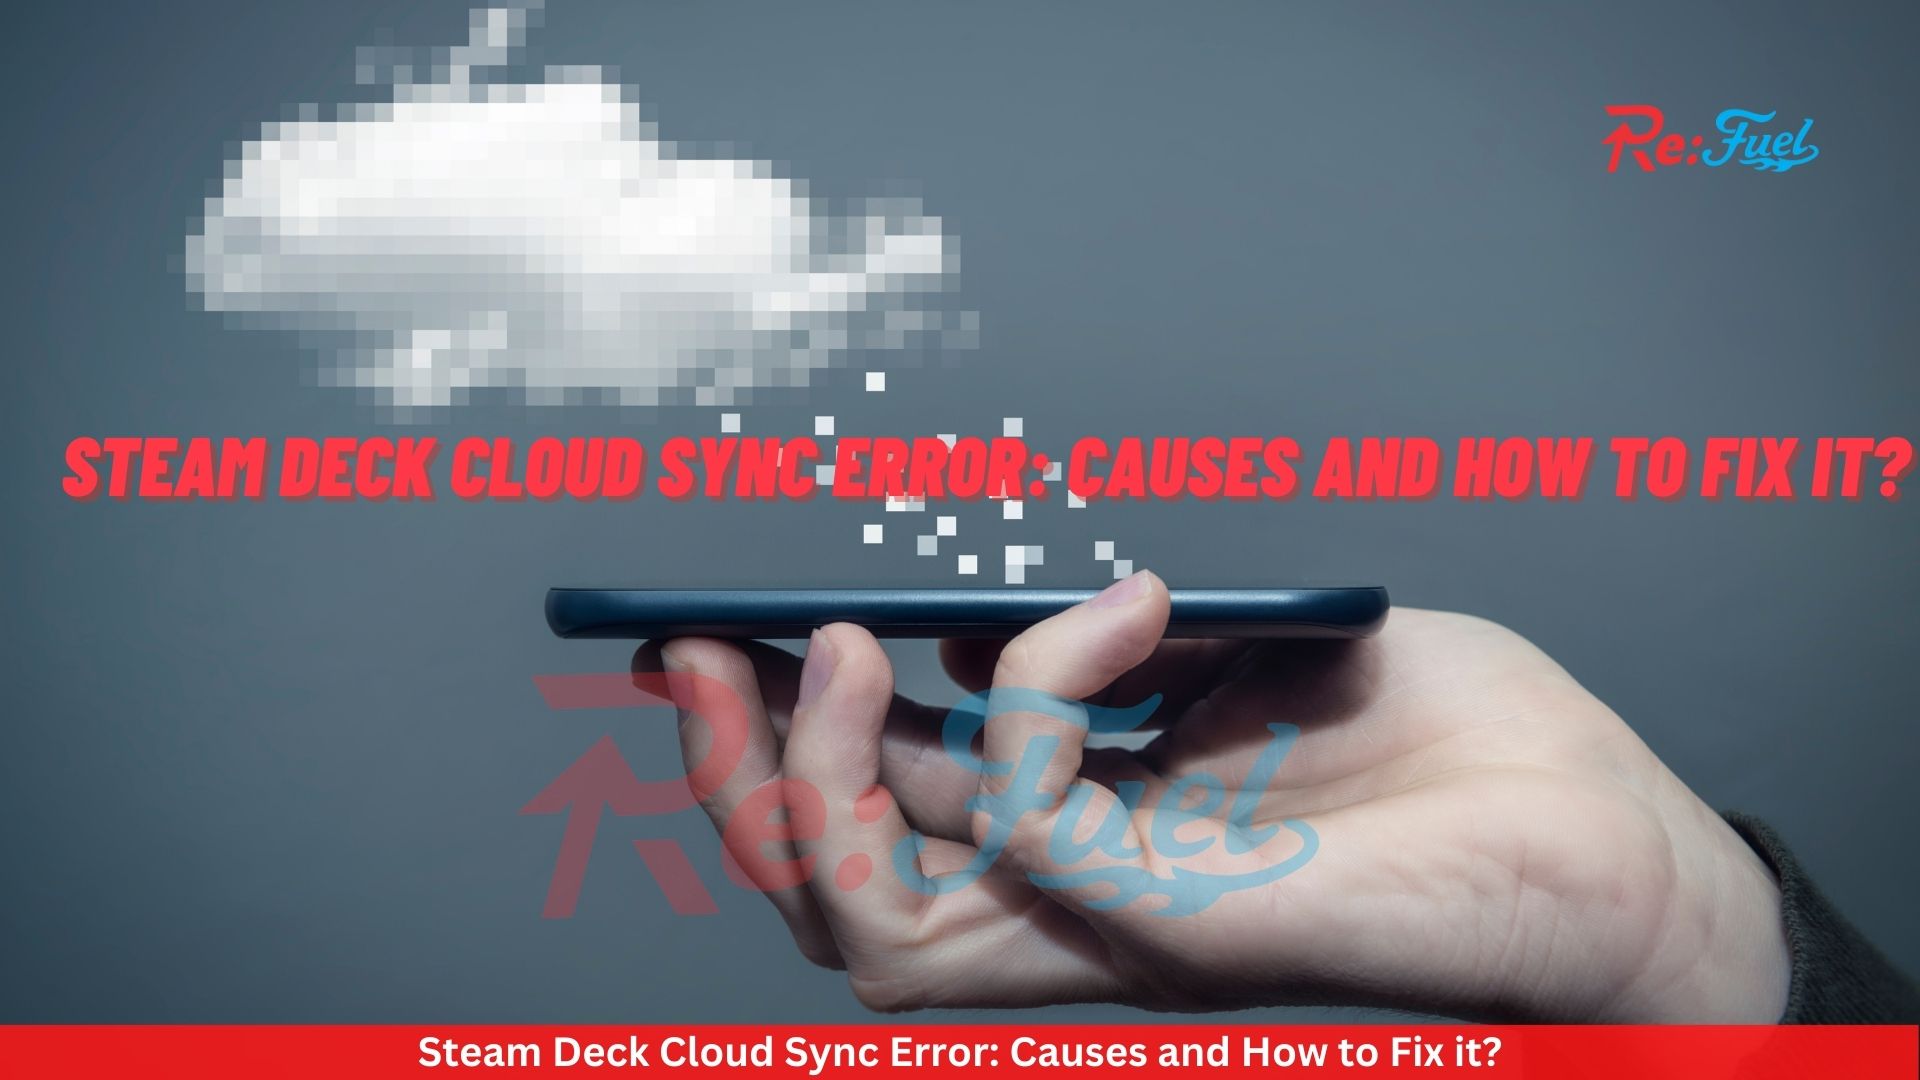 Steam Deck Cloud Sync Error: Causes and How to Fix it?